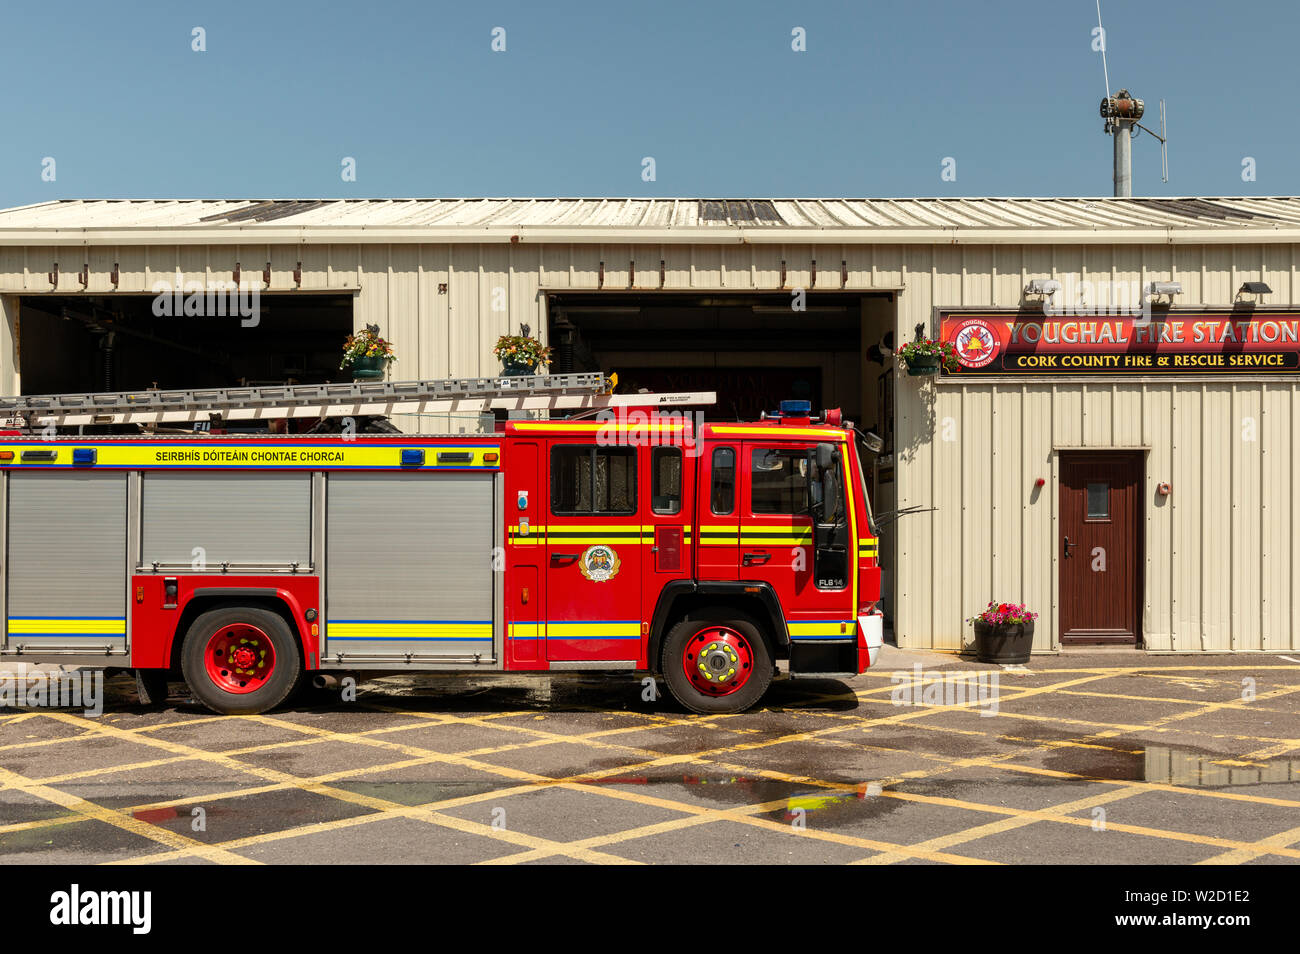 The Youghal Fire Station and fire truck on sunny day in Youghal, County Cork, Ireland Stock Photo